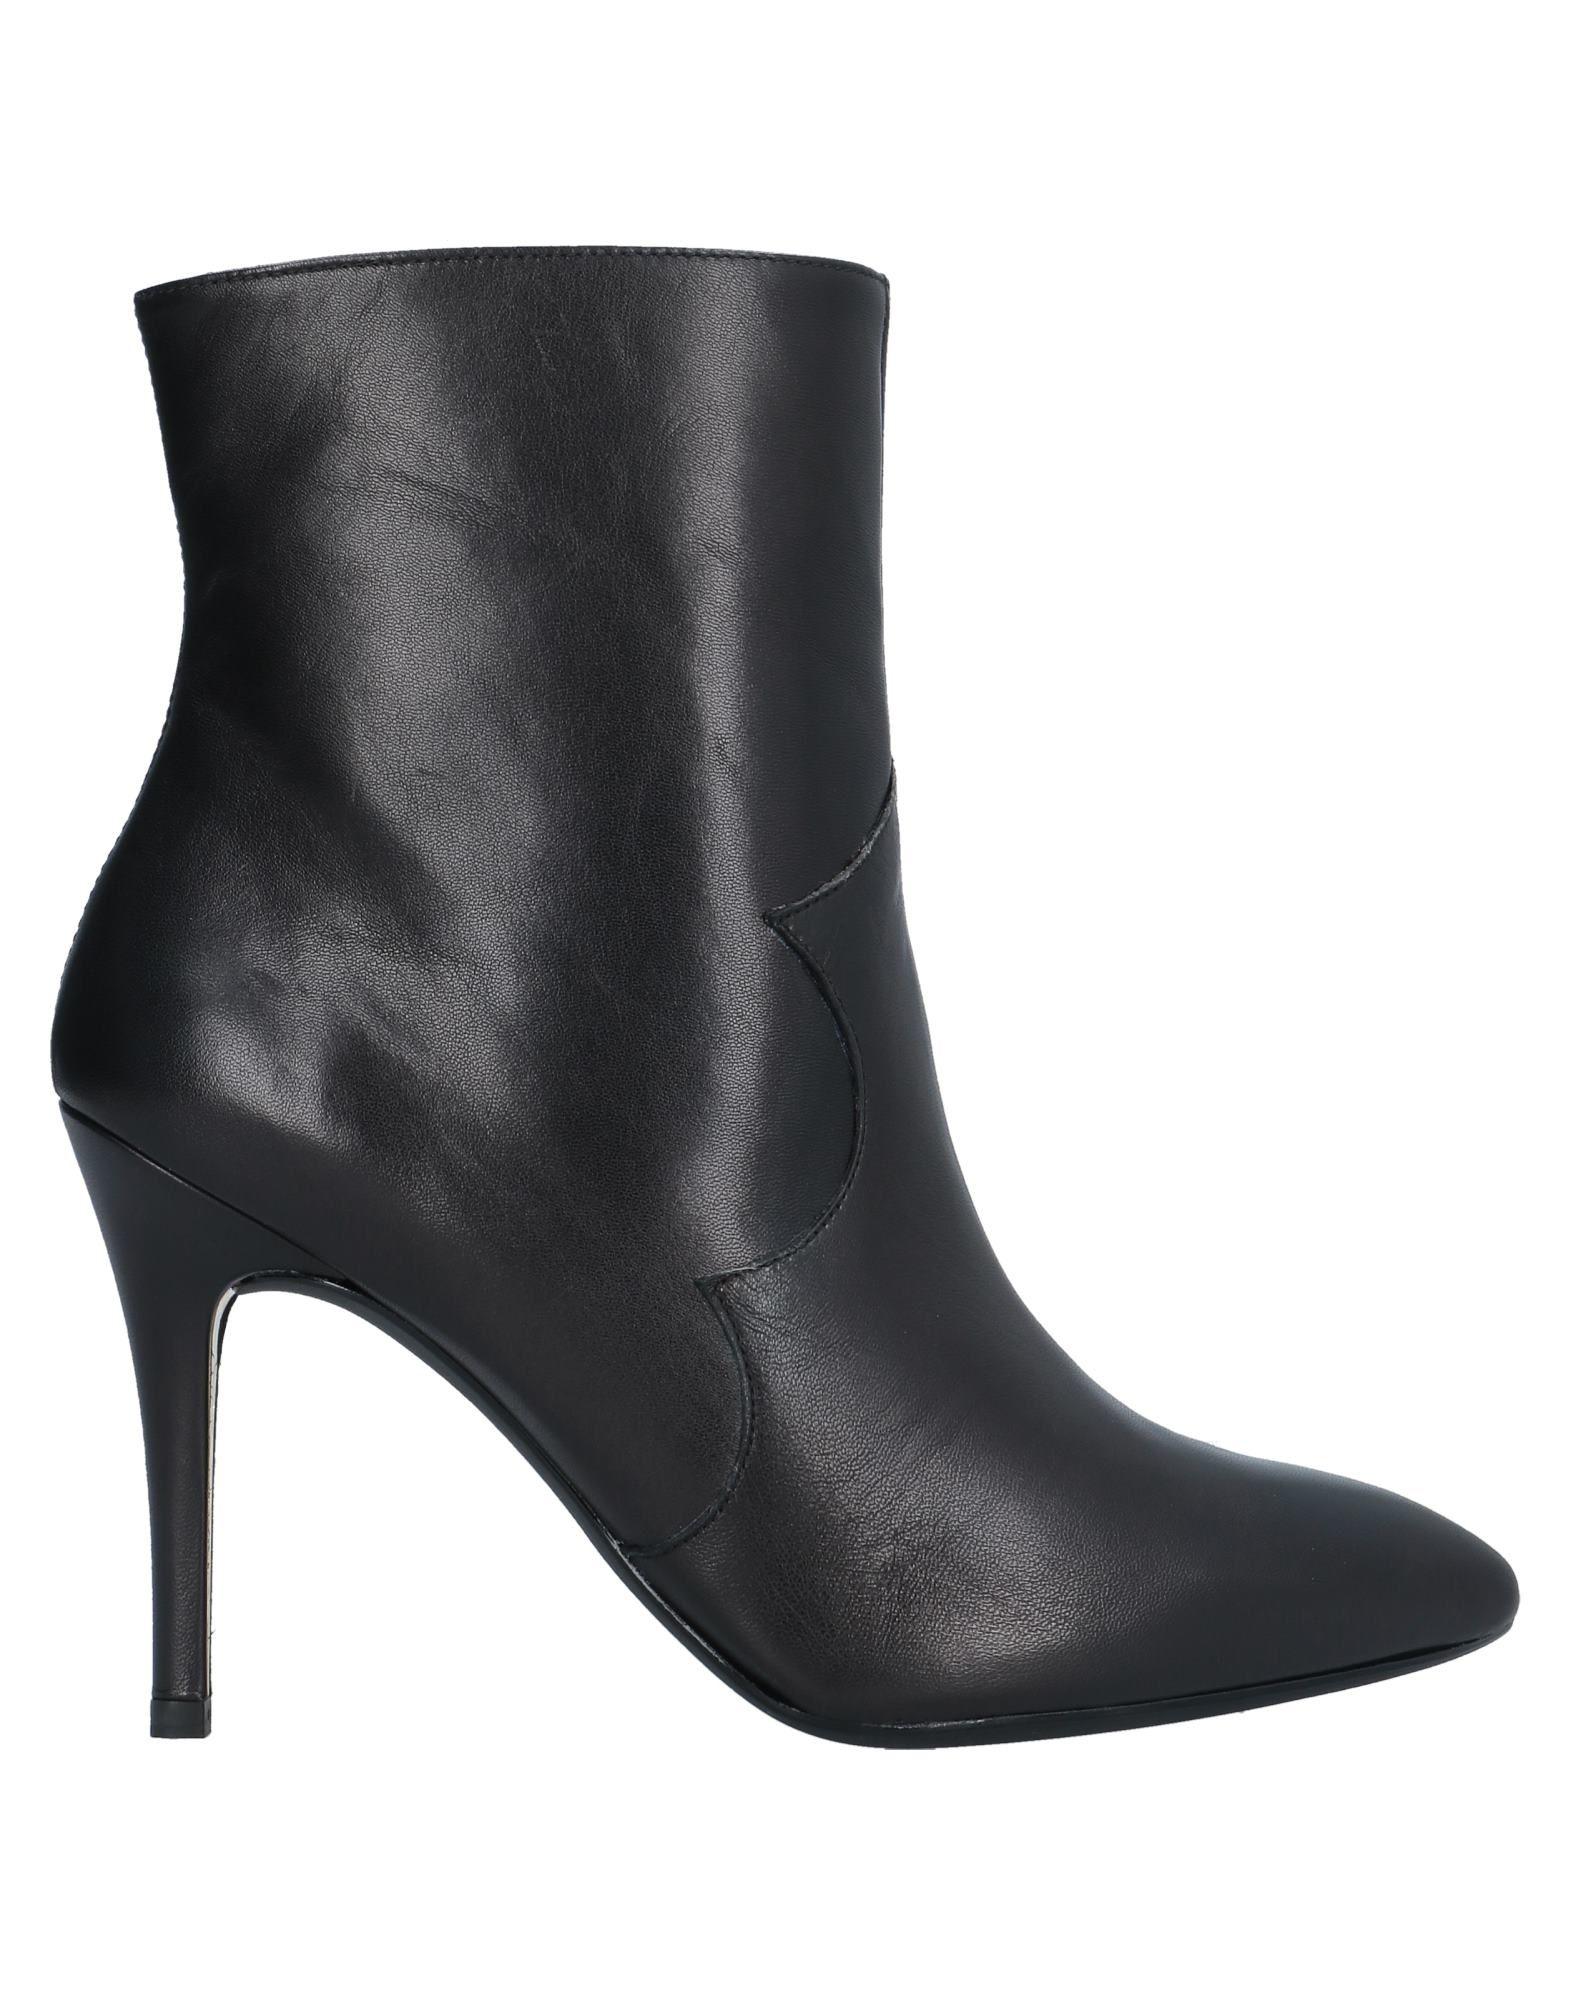 Unisa Leather Ankle Boots in Black - Lyst